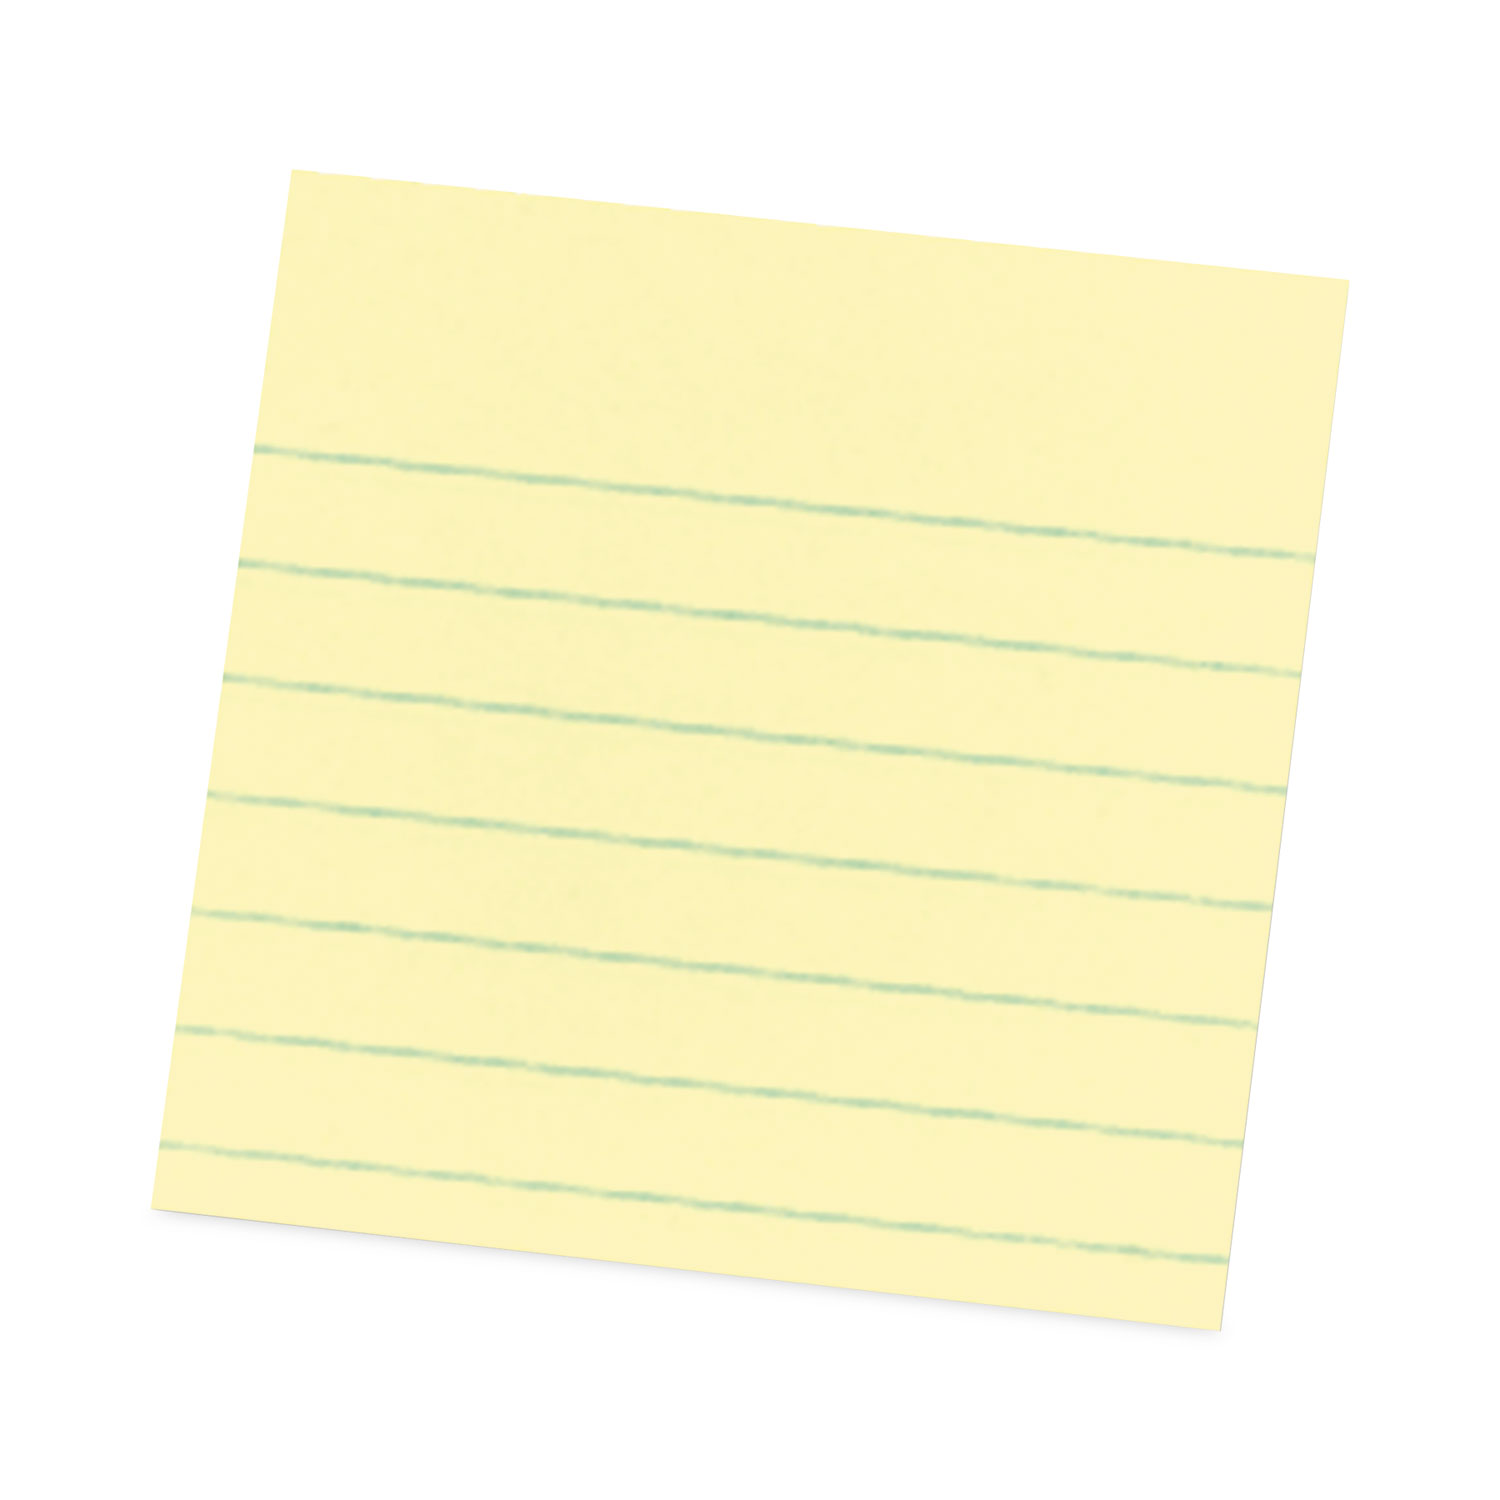 Post-it® Super Sticky Notes, 1 7/8 in x 1 7/8 in, Canary Yellow